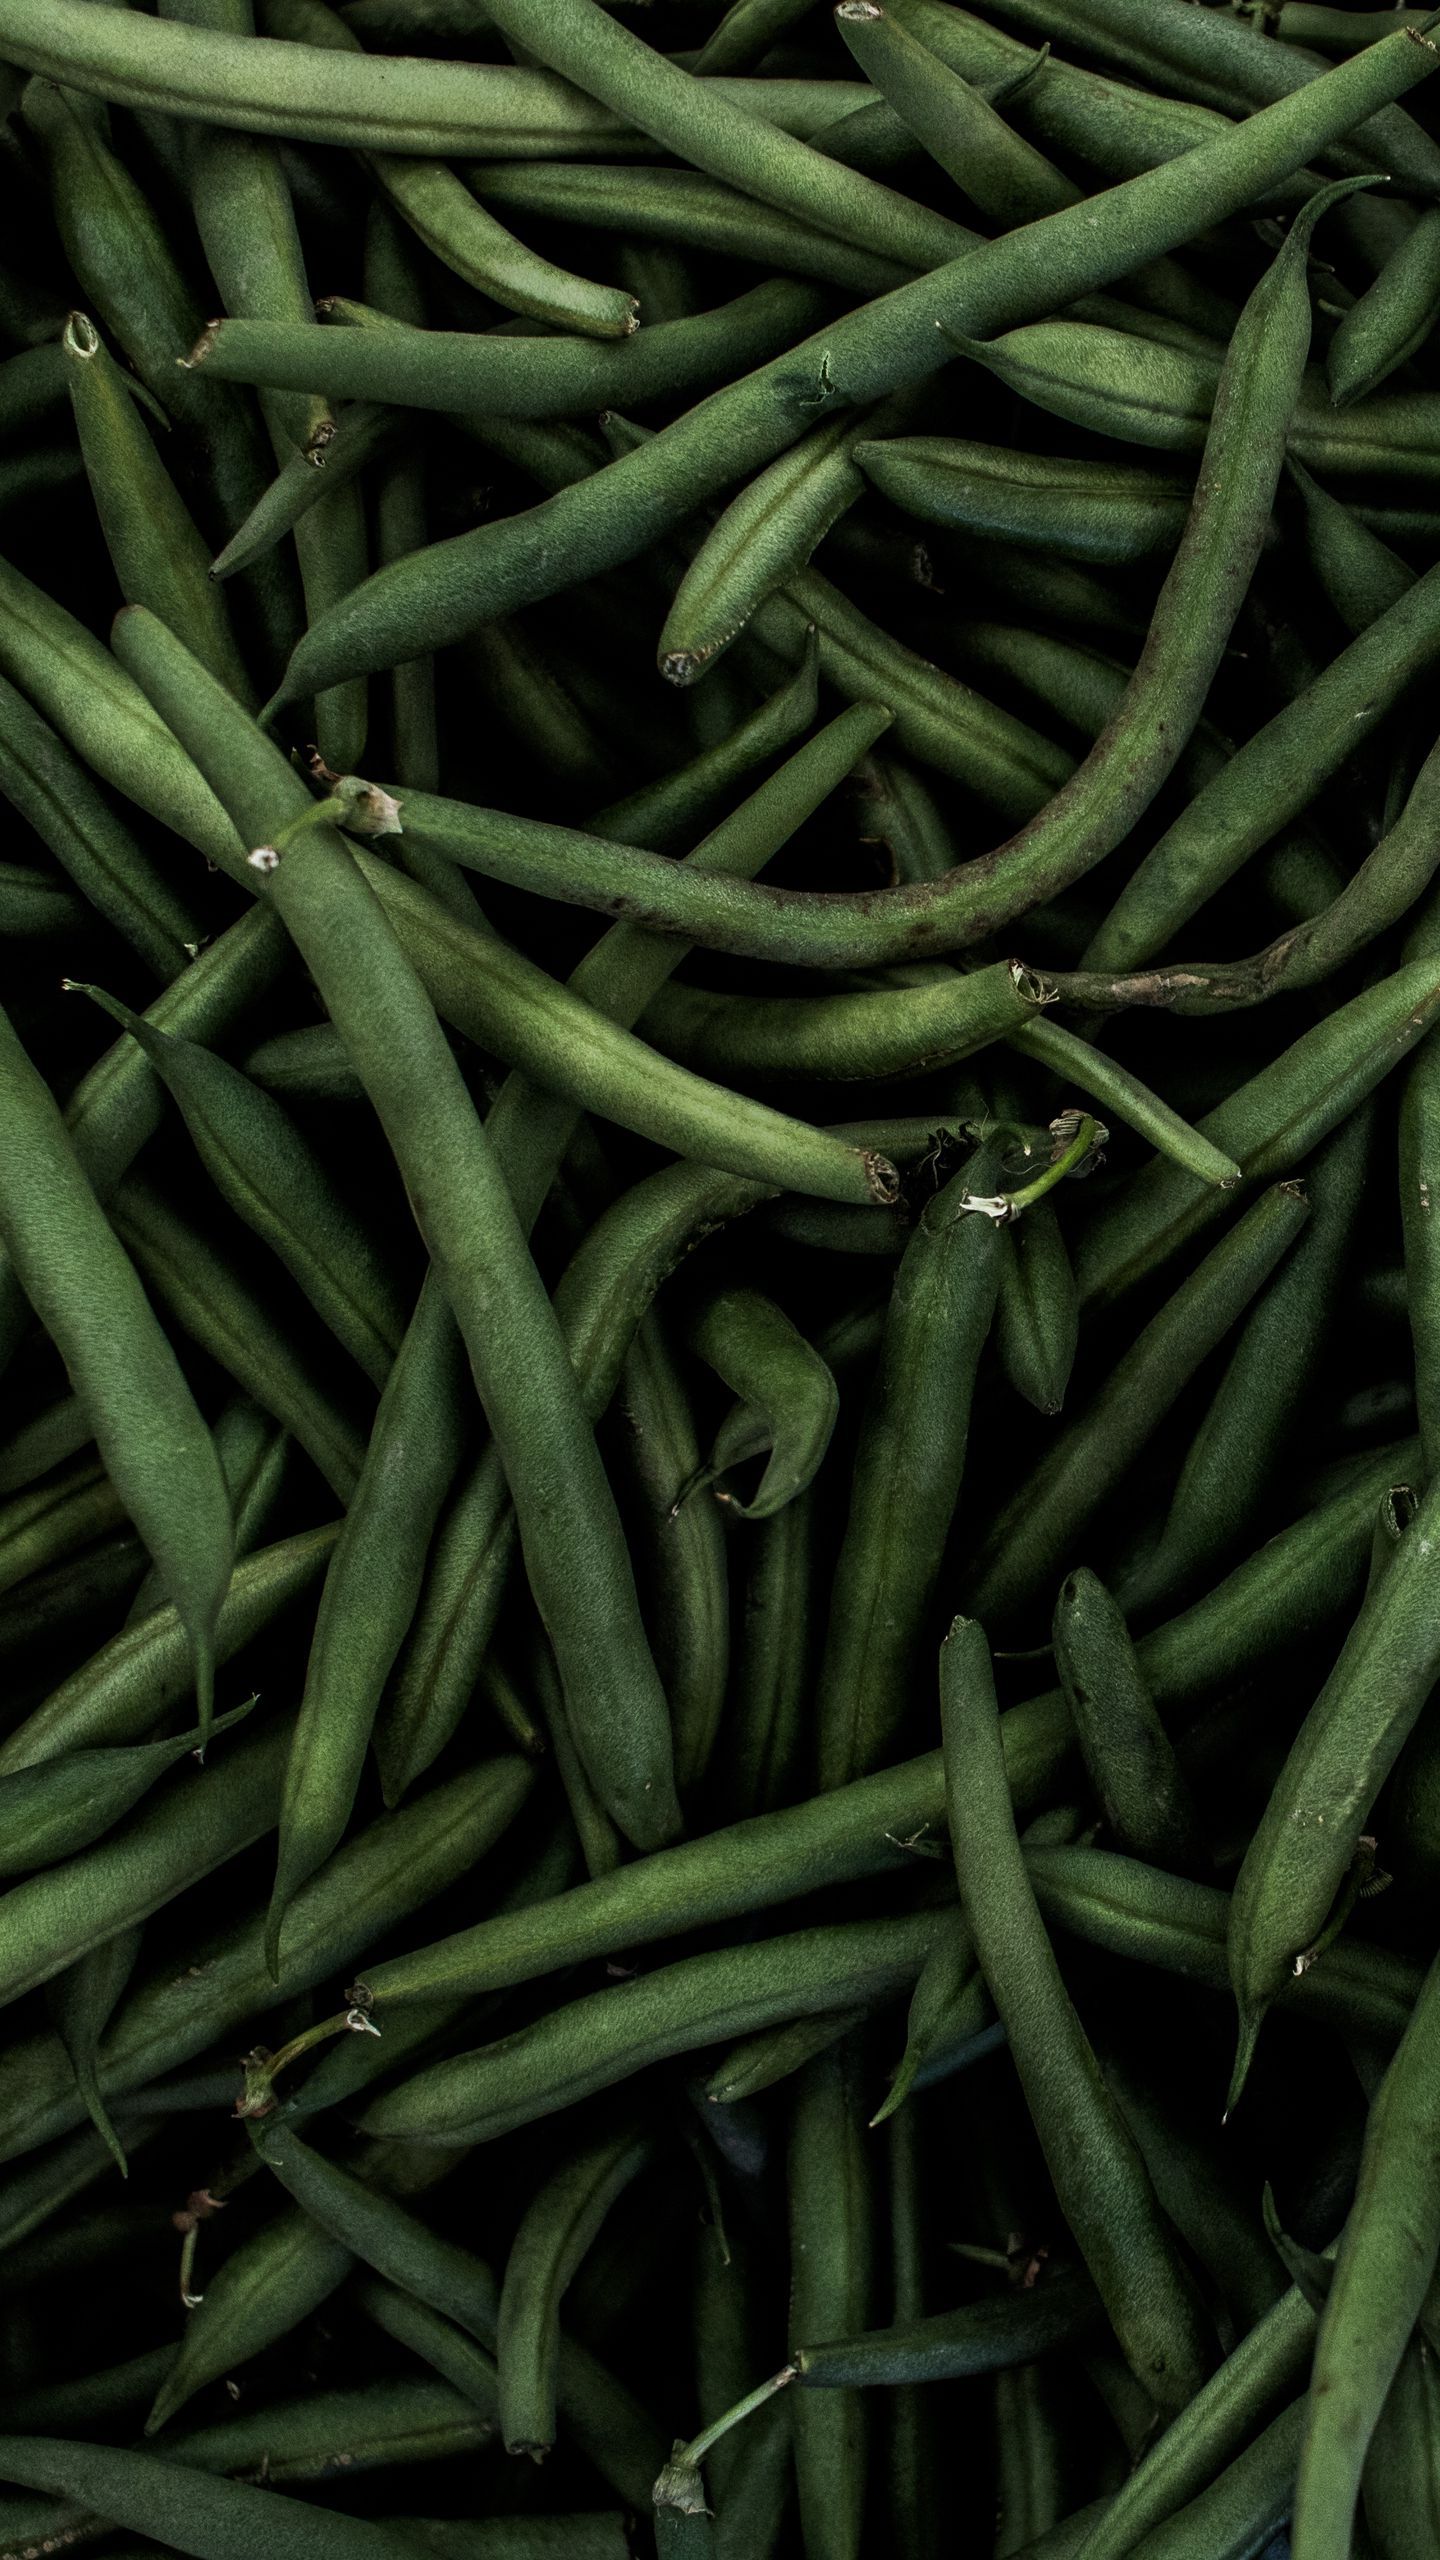 Download wallpaper 1440x2560 beans, pods, green qhd samsung galaxy s s edge, note, lg g4 HD background